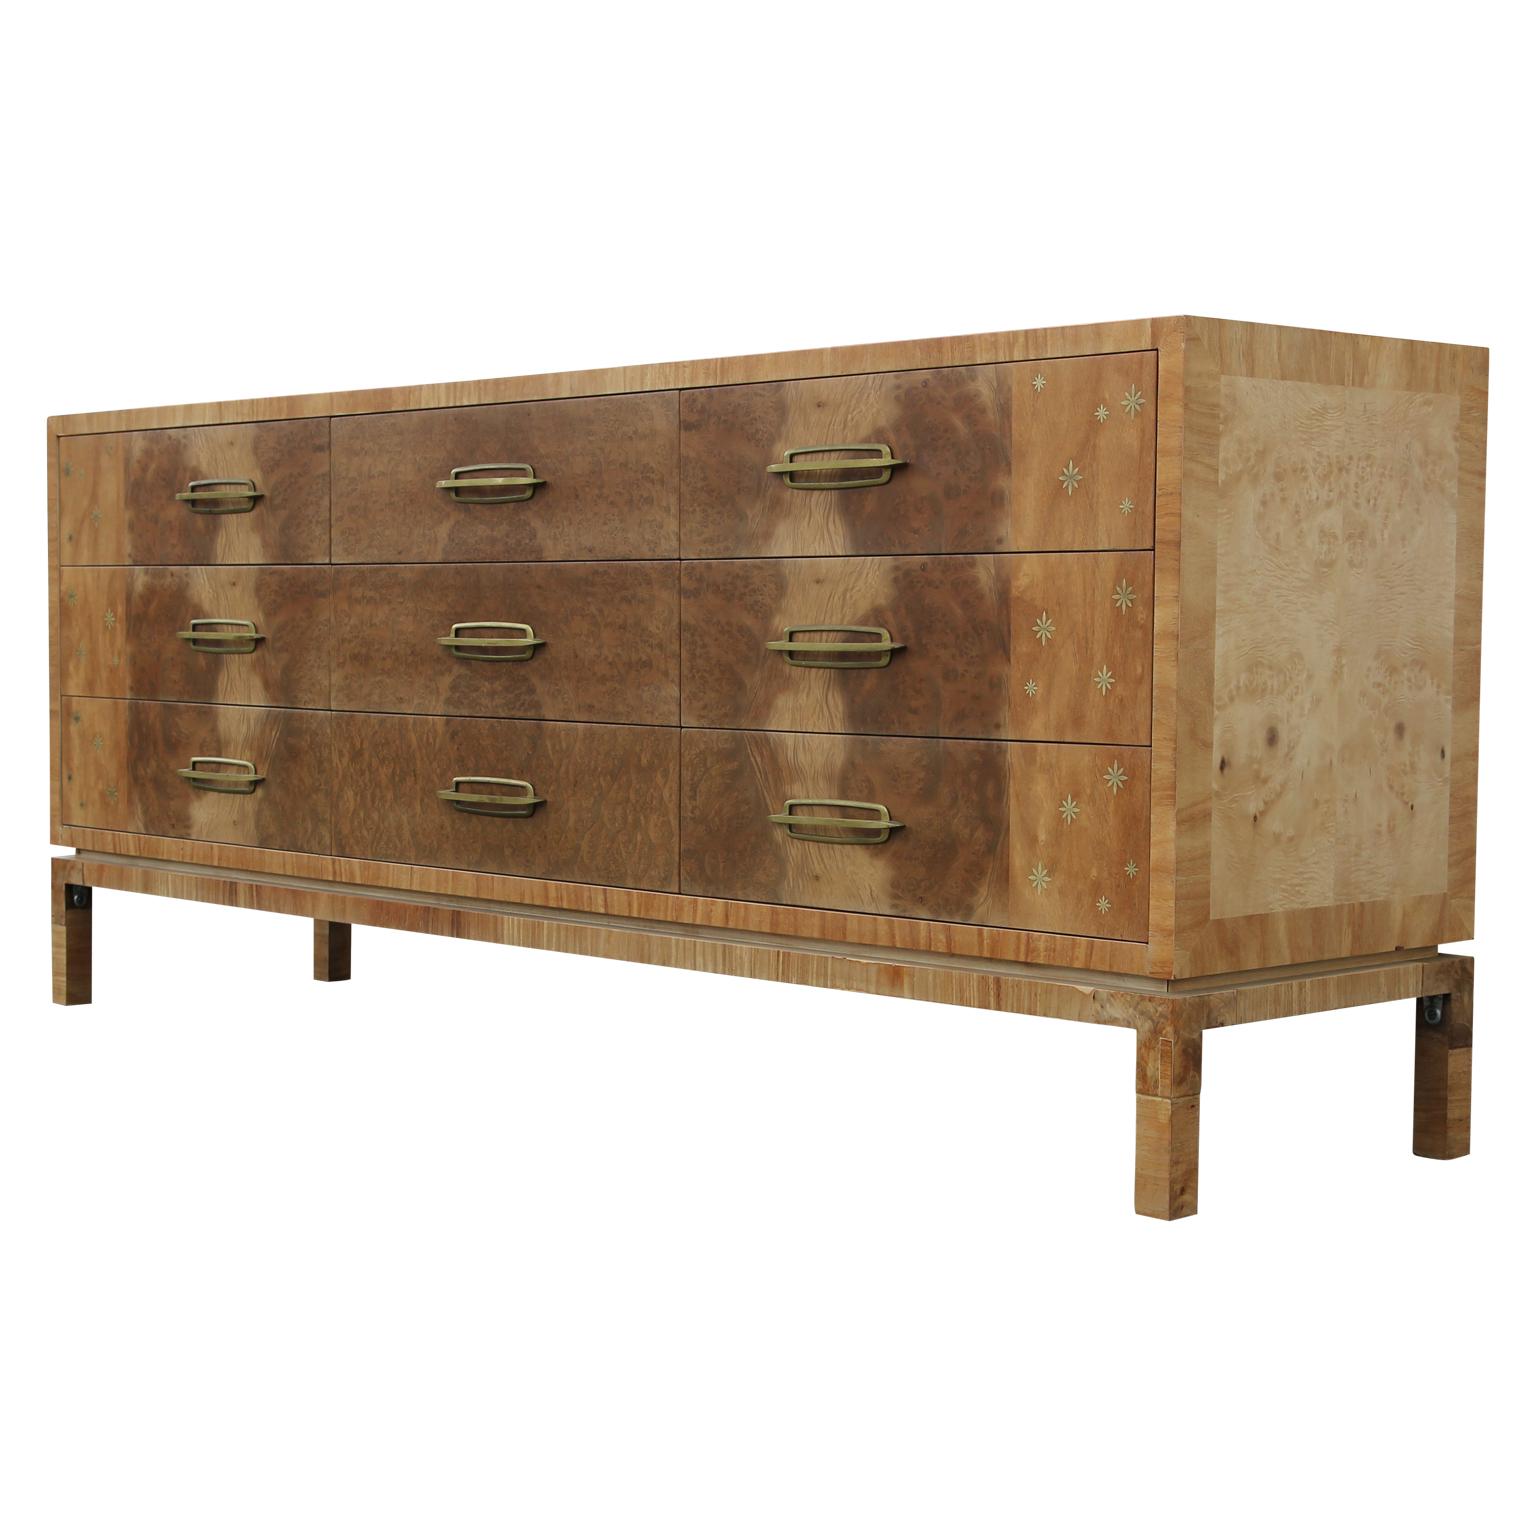 Rare and unique multi functional dresser or sideboard with nine drawers. The dresser features inlayed brass stars and brass handles. The dresser is made from light burl wood and was created Romweber Furniture. Designed by Harold Schwartz. Fully